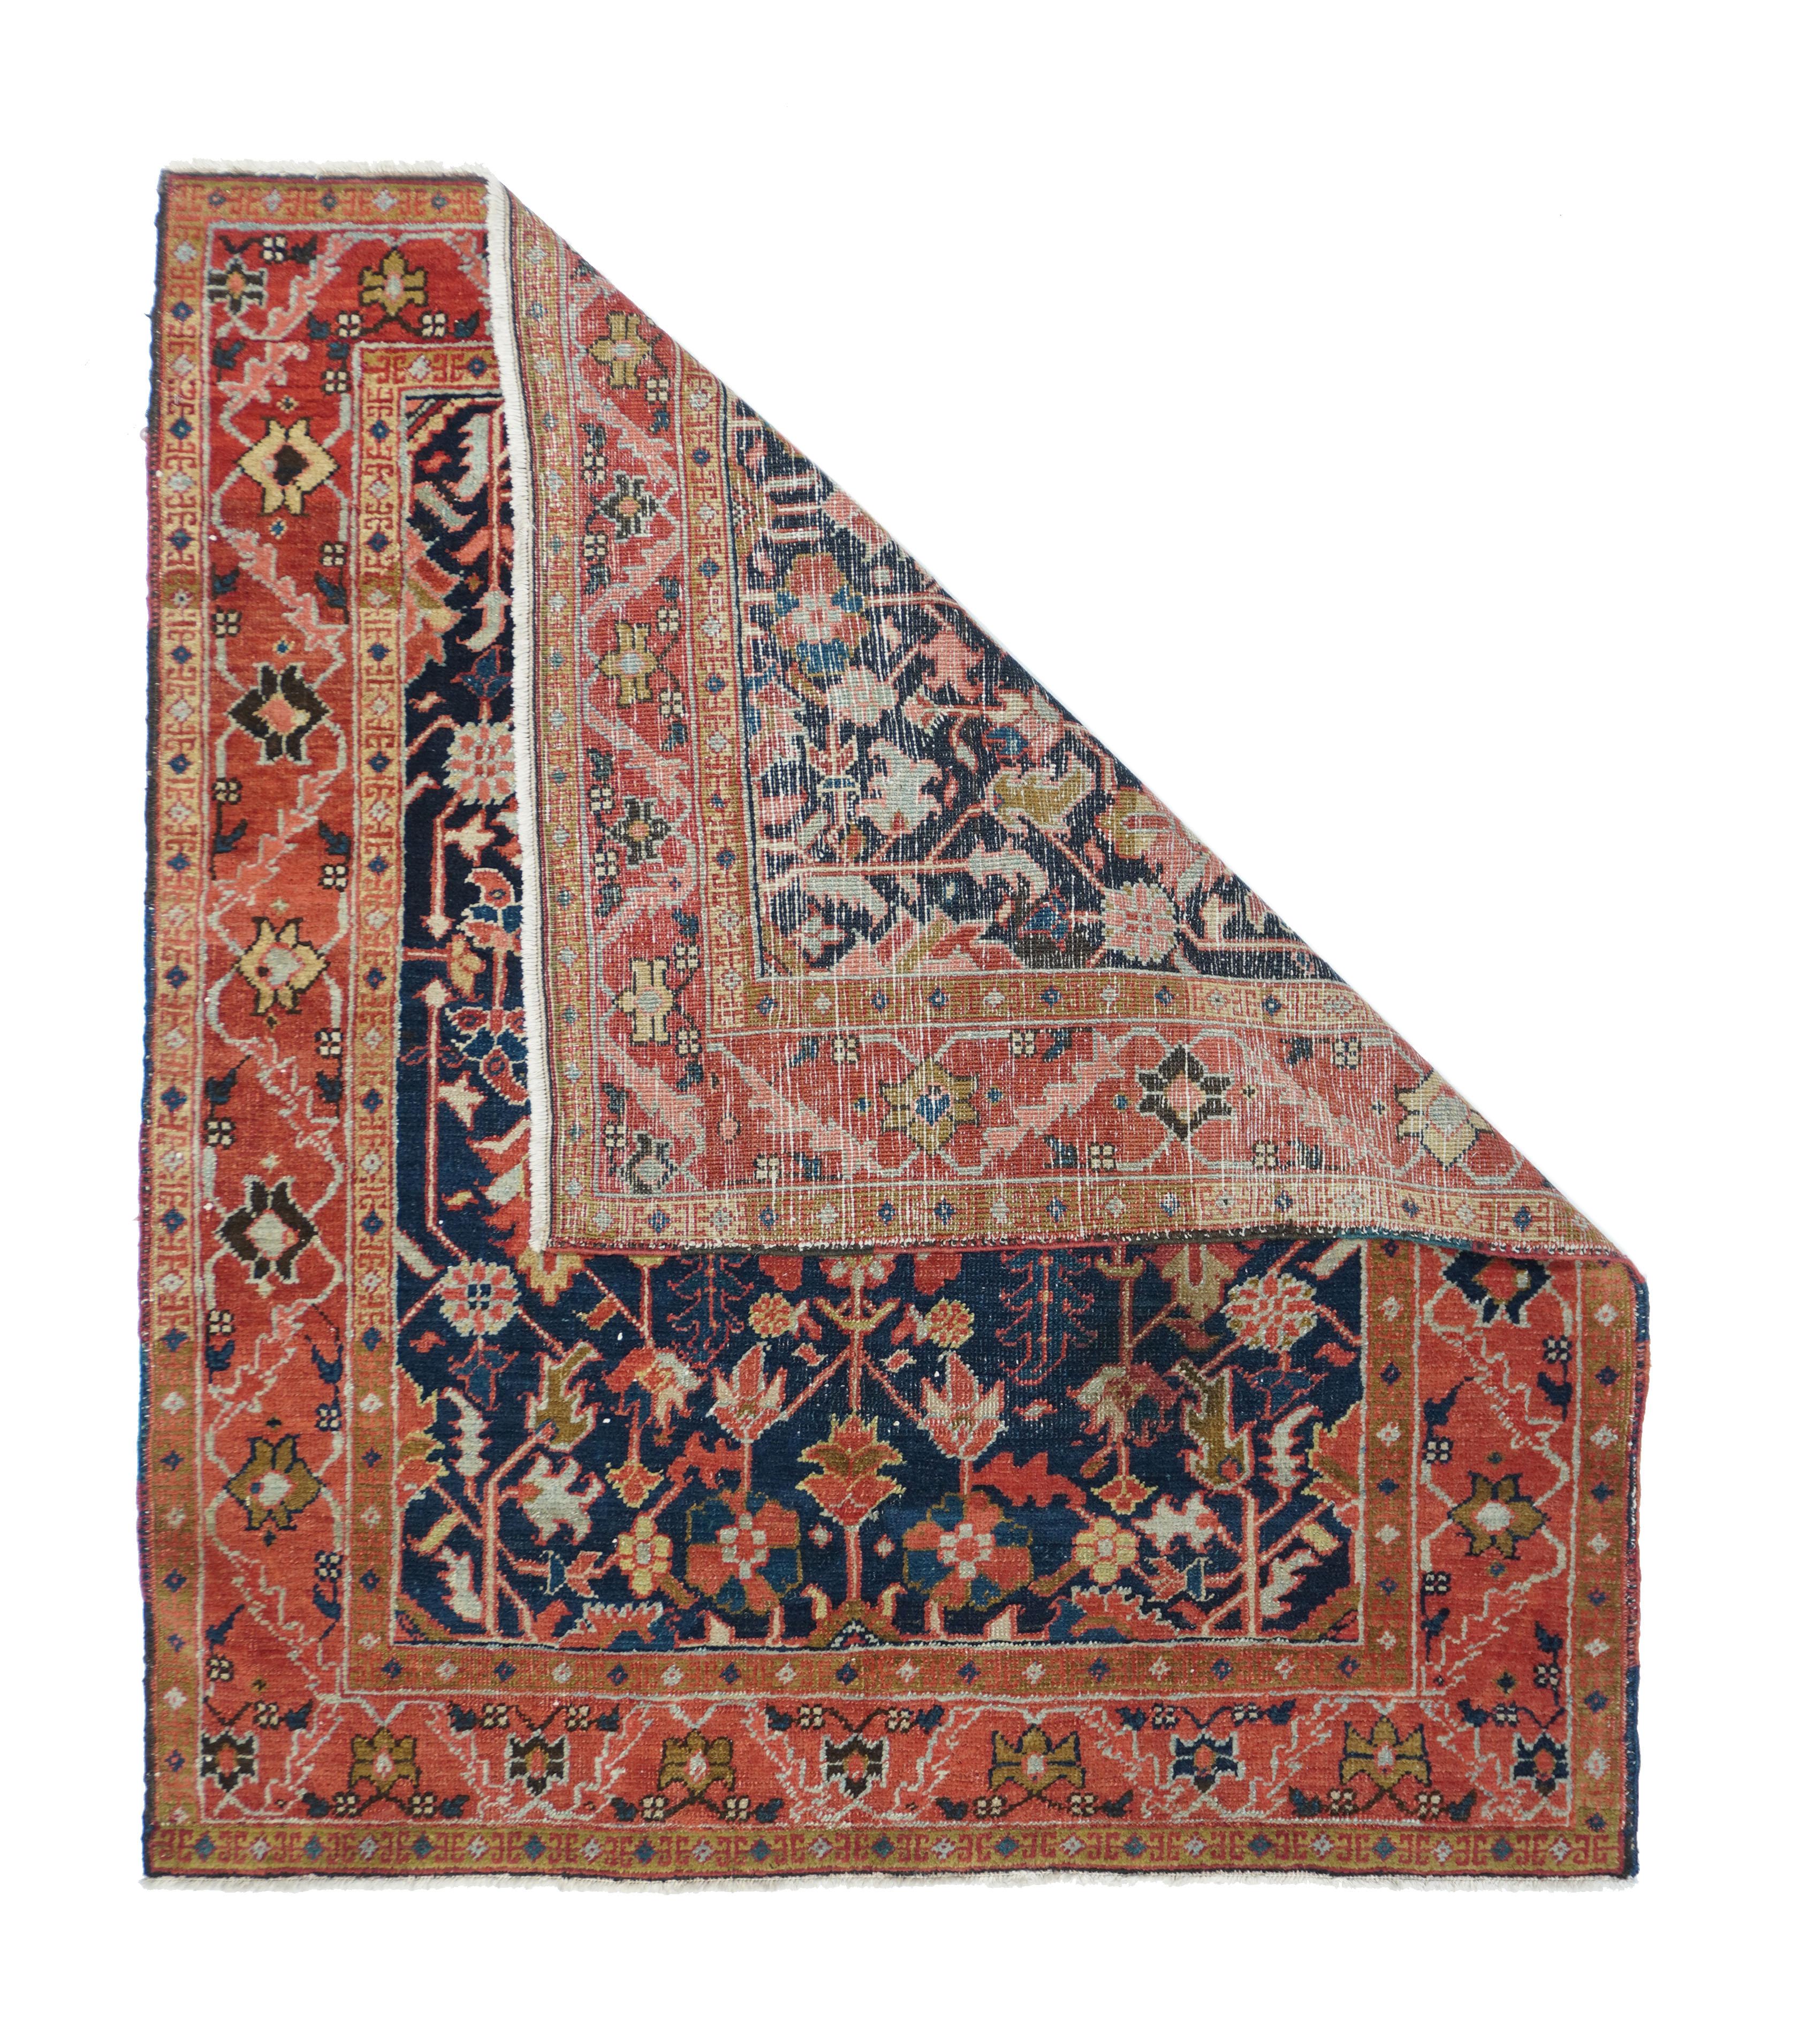 Antique Serapi Rug 4'3'' x 5'. The dark blue field shows palmettes and deeply barbed leaves, all on stiff stems, with a layered hexagonal centre. Red border with strip style pattern of serrated slanted leaves and simple palmettes. Moderate weave.